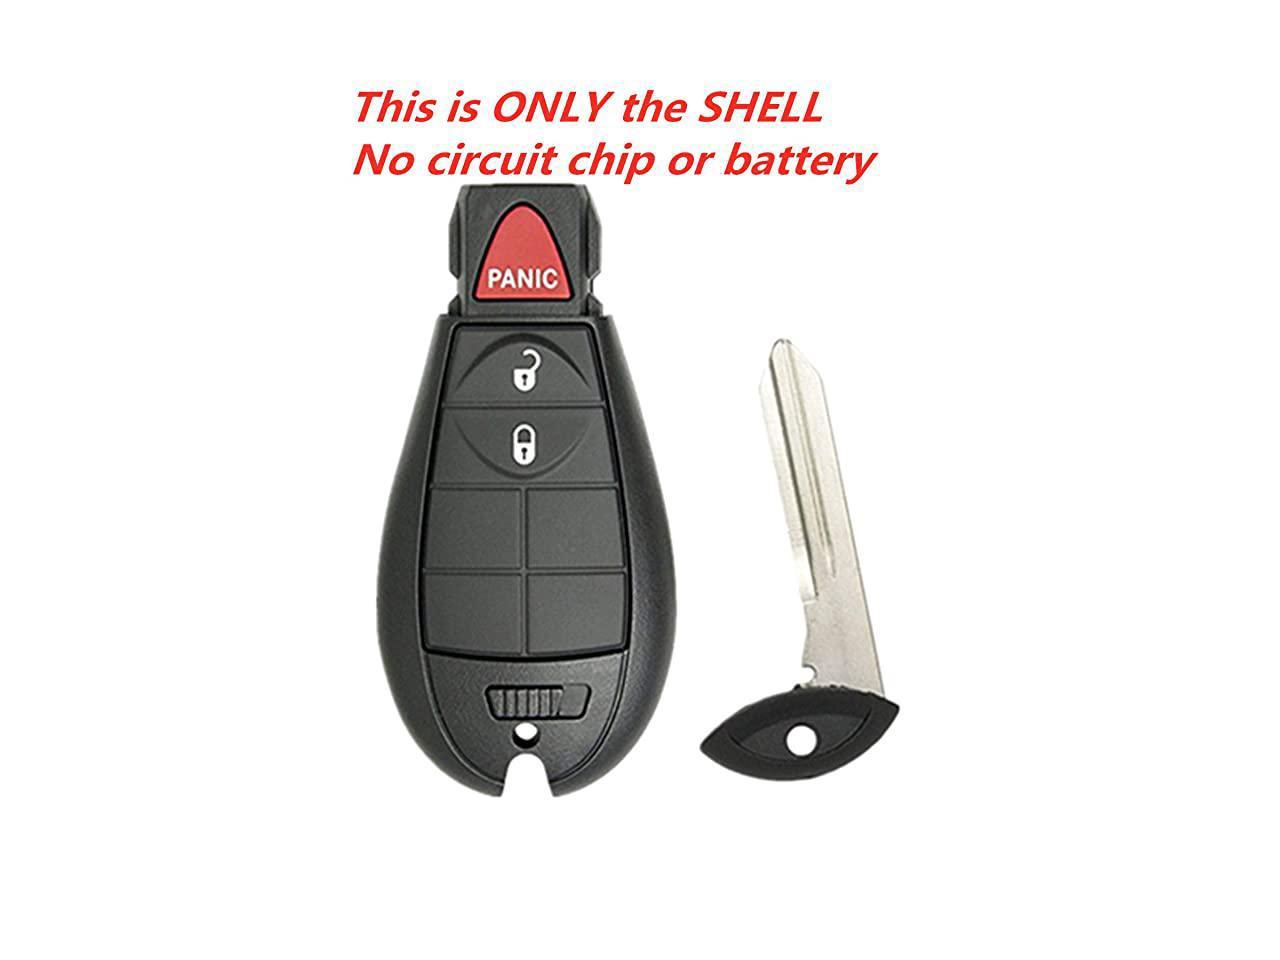 2 FOR 2013 2014 2015 2016 2017 DODGE RAM 1500 2500 3500 KEY REMOTE FOB GQ4-53T 